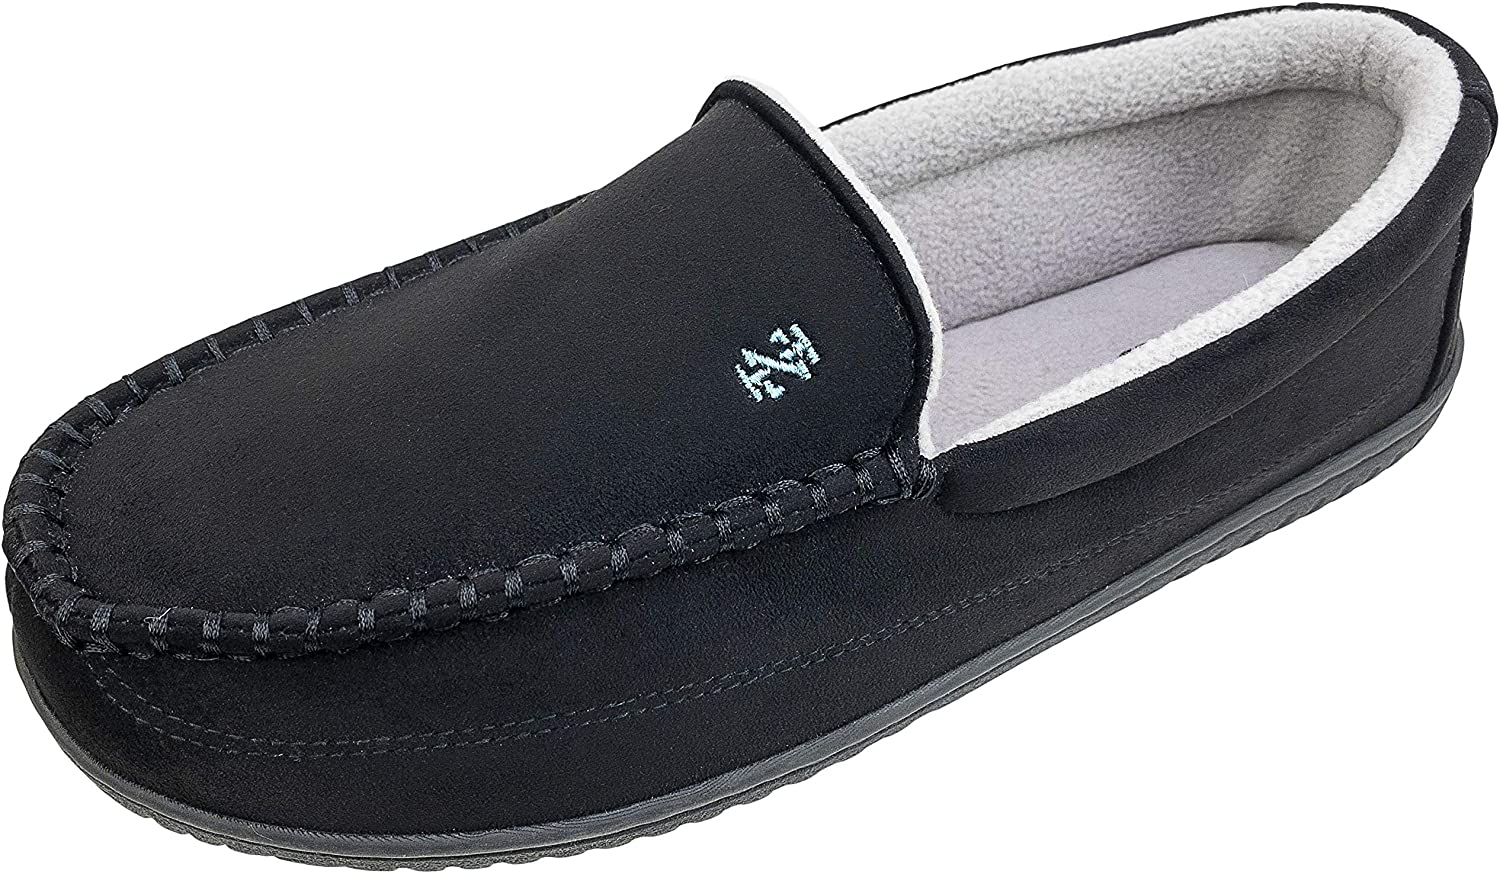 Size 8 to 13 IZOD Mens Slippers Classic Slip on Clogs with Memory Foam,Winter Warm Slippers 